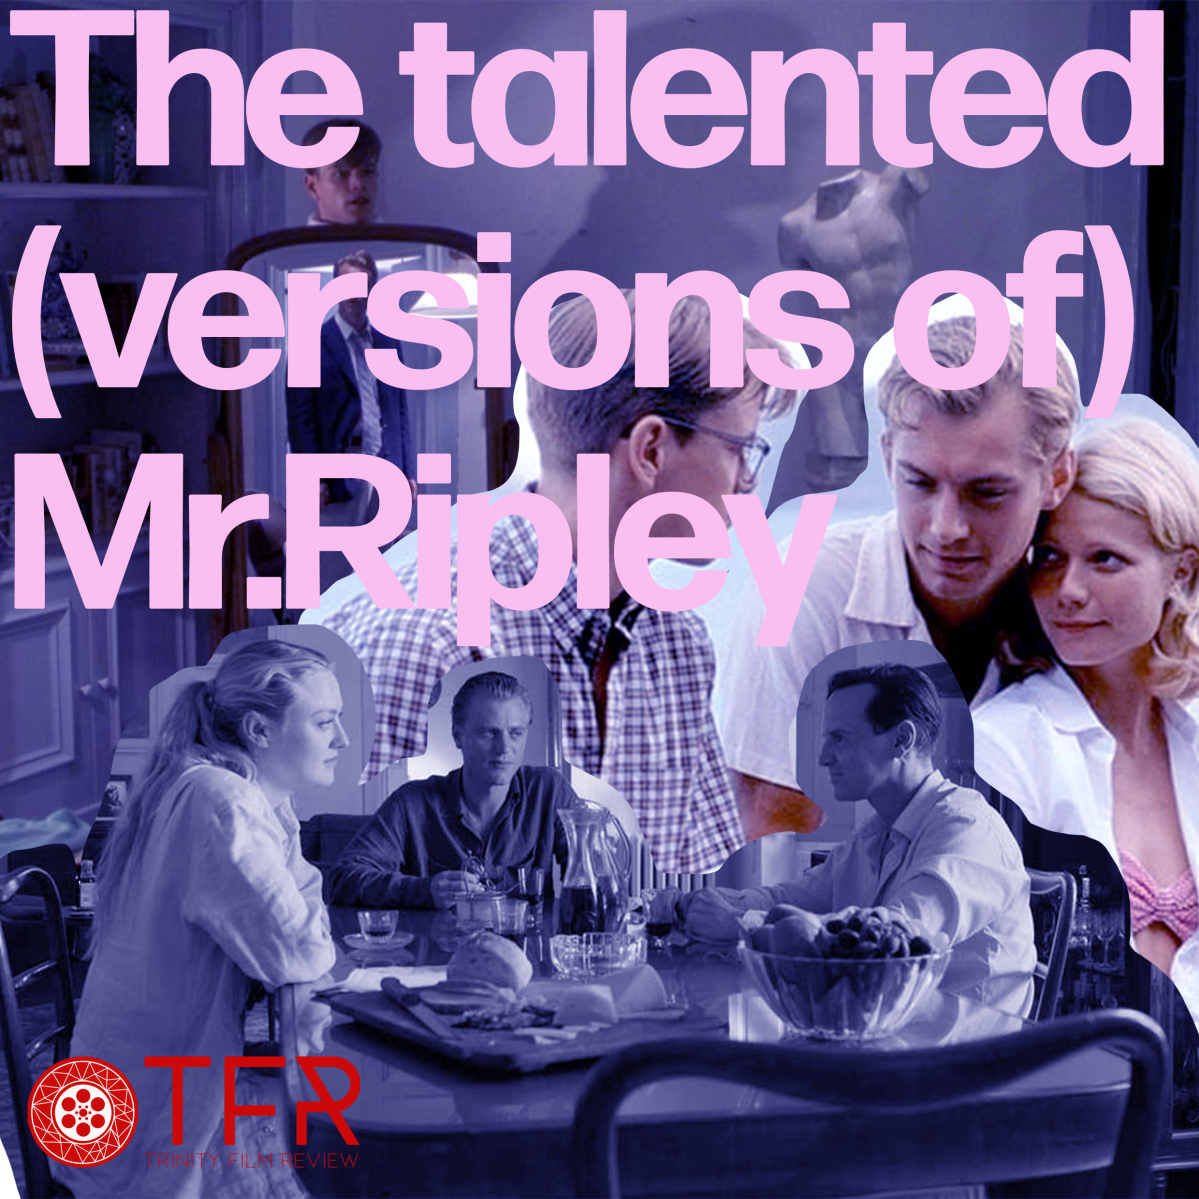 The talented (versions of) Mr.Ripley